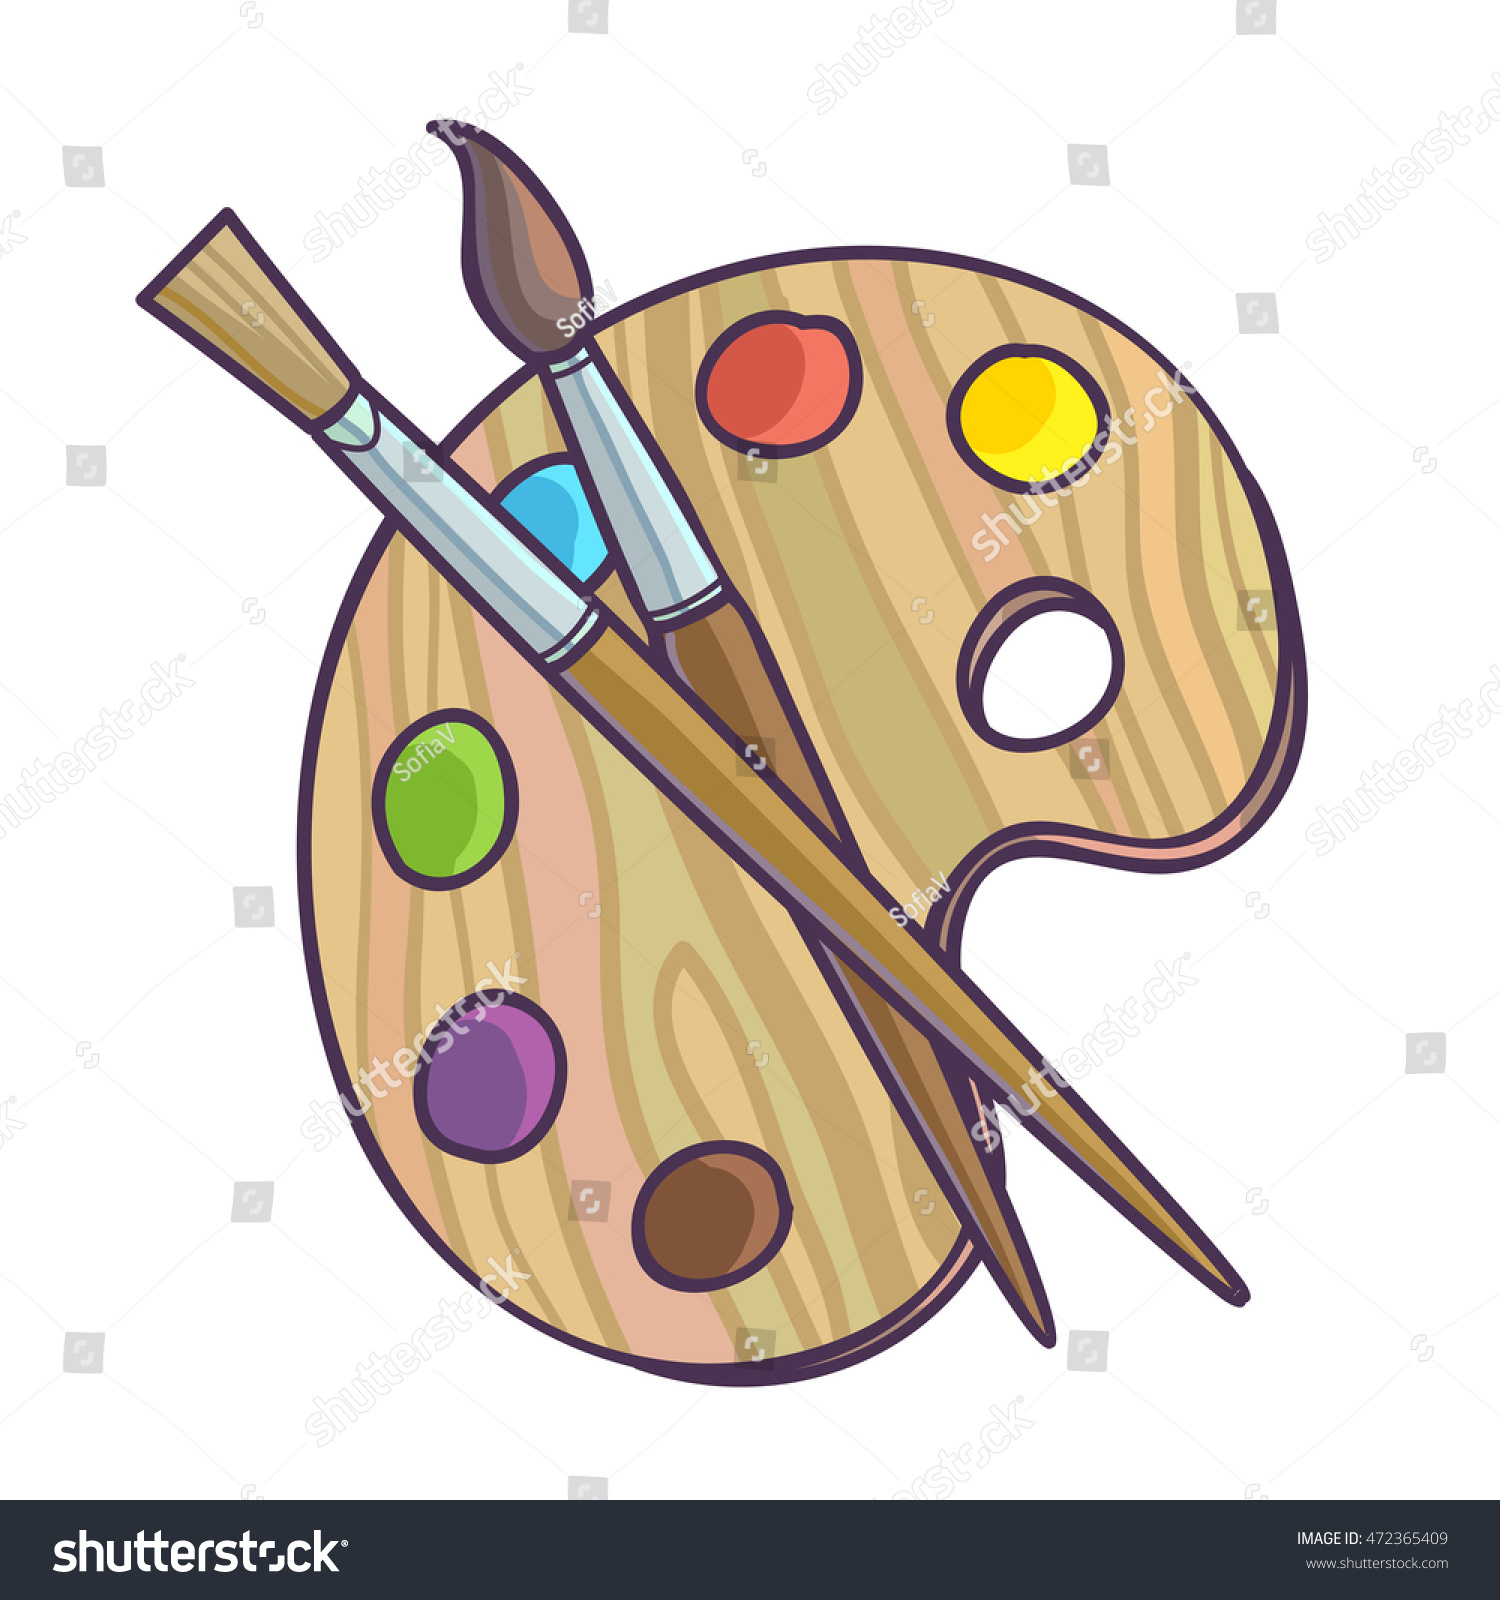 Art Palette Paint Brush Drawing Vector Stock Vector (Royalty Free) 472365409